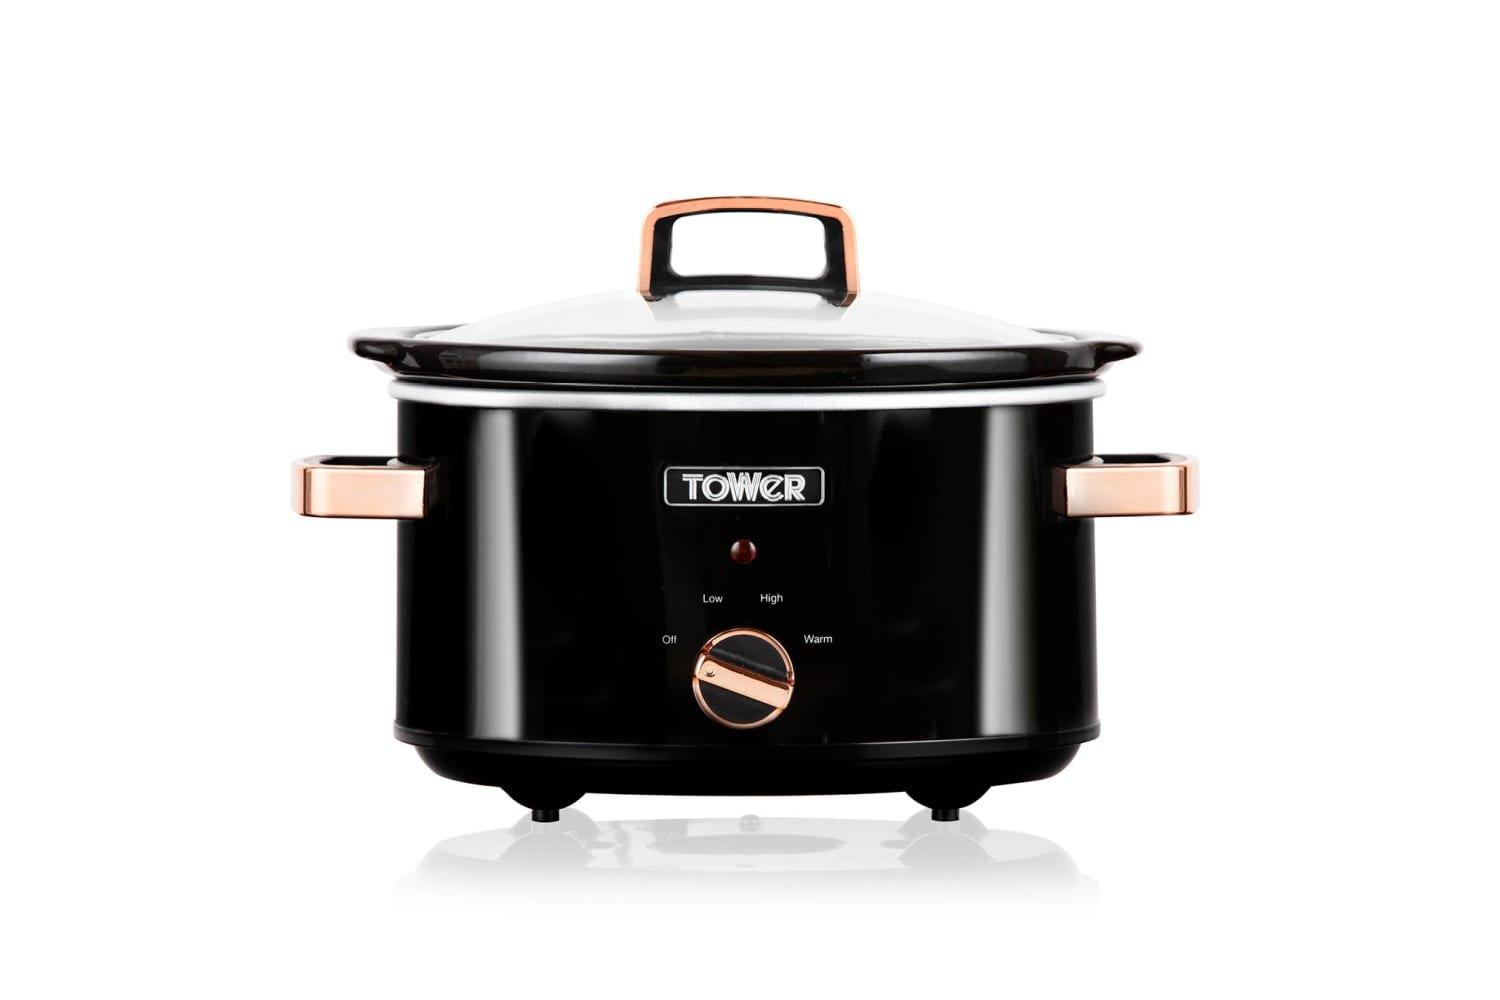 Tower 3.5l Slow Cooker